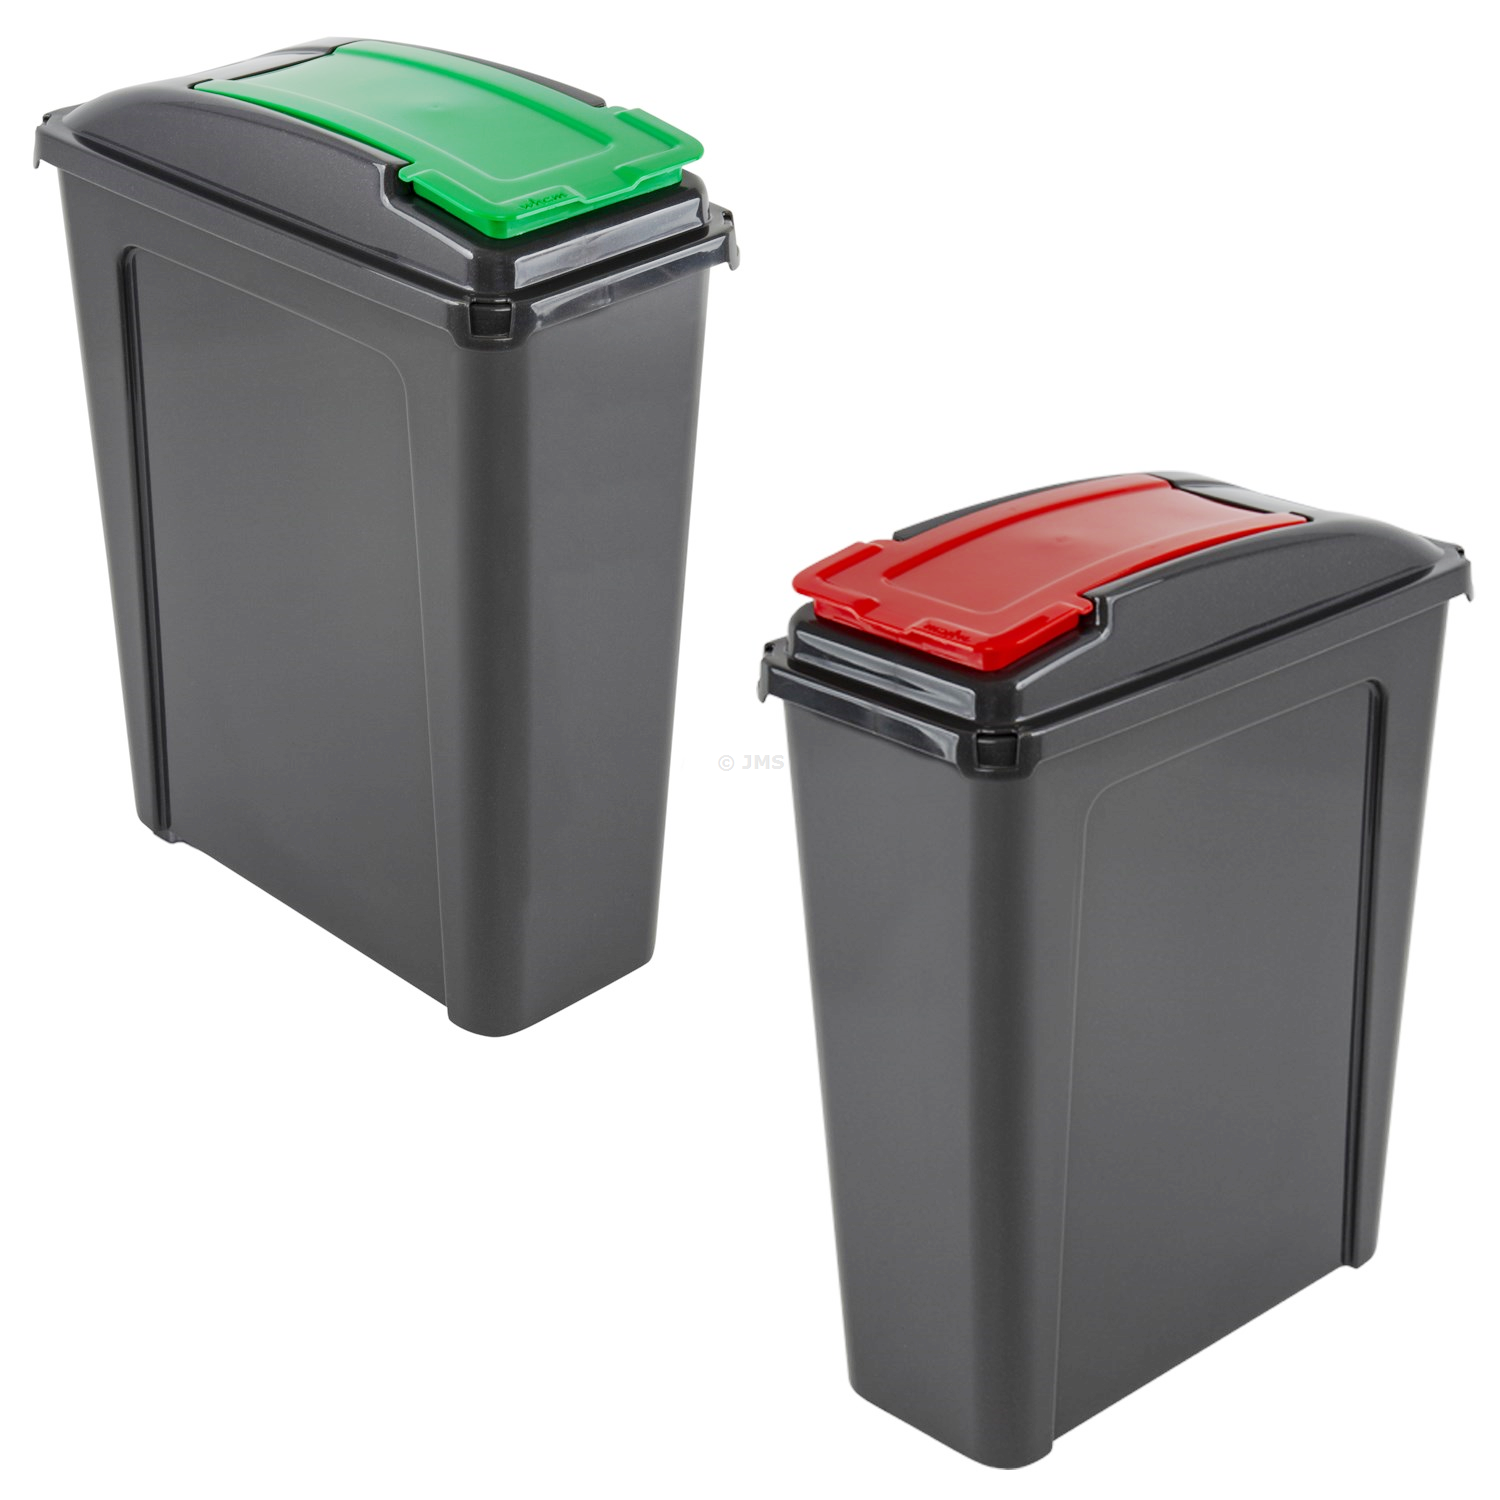 Plastic Recycle It 25L Slimline Bin & Lid RED + GREEN Waste Recycling Dustbin Multi-purpose Storage Container Home Kitchen Garden